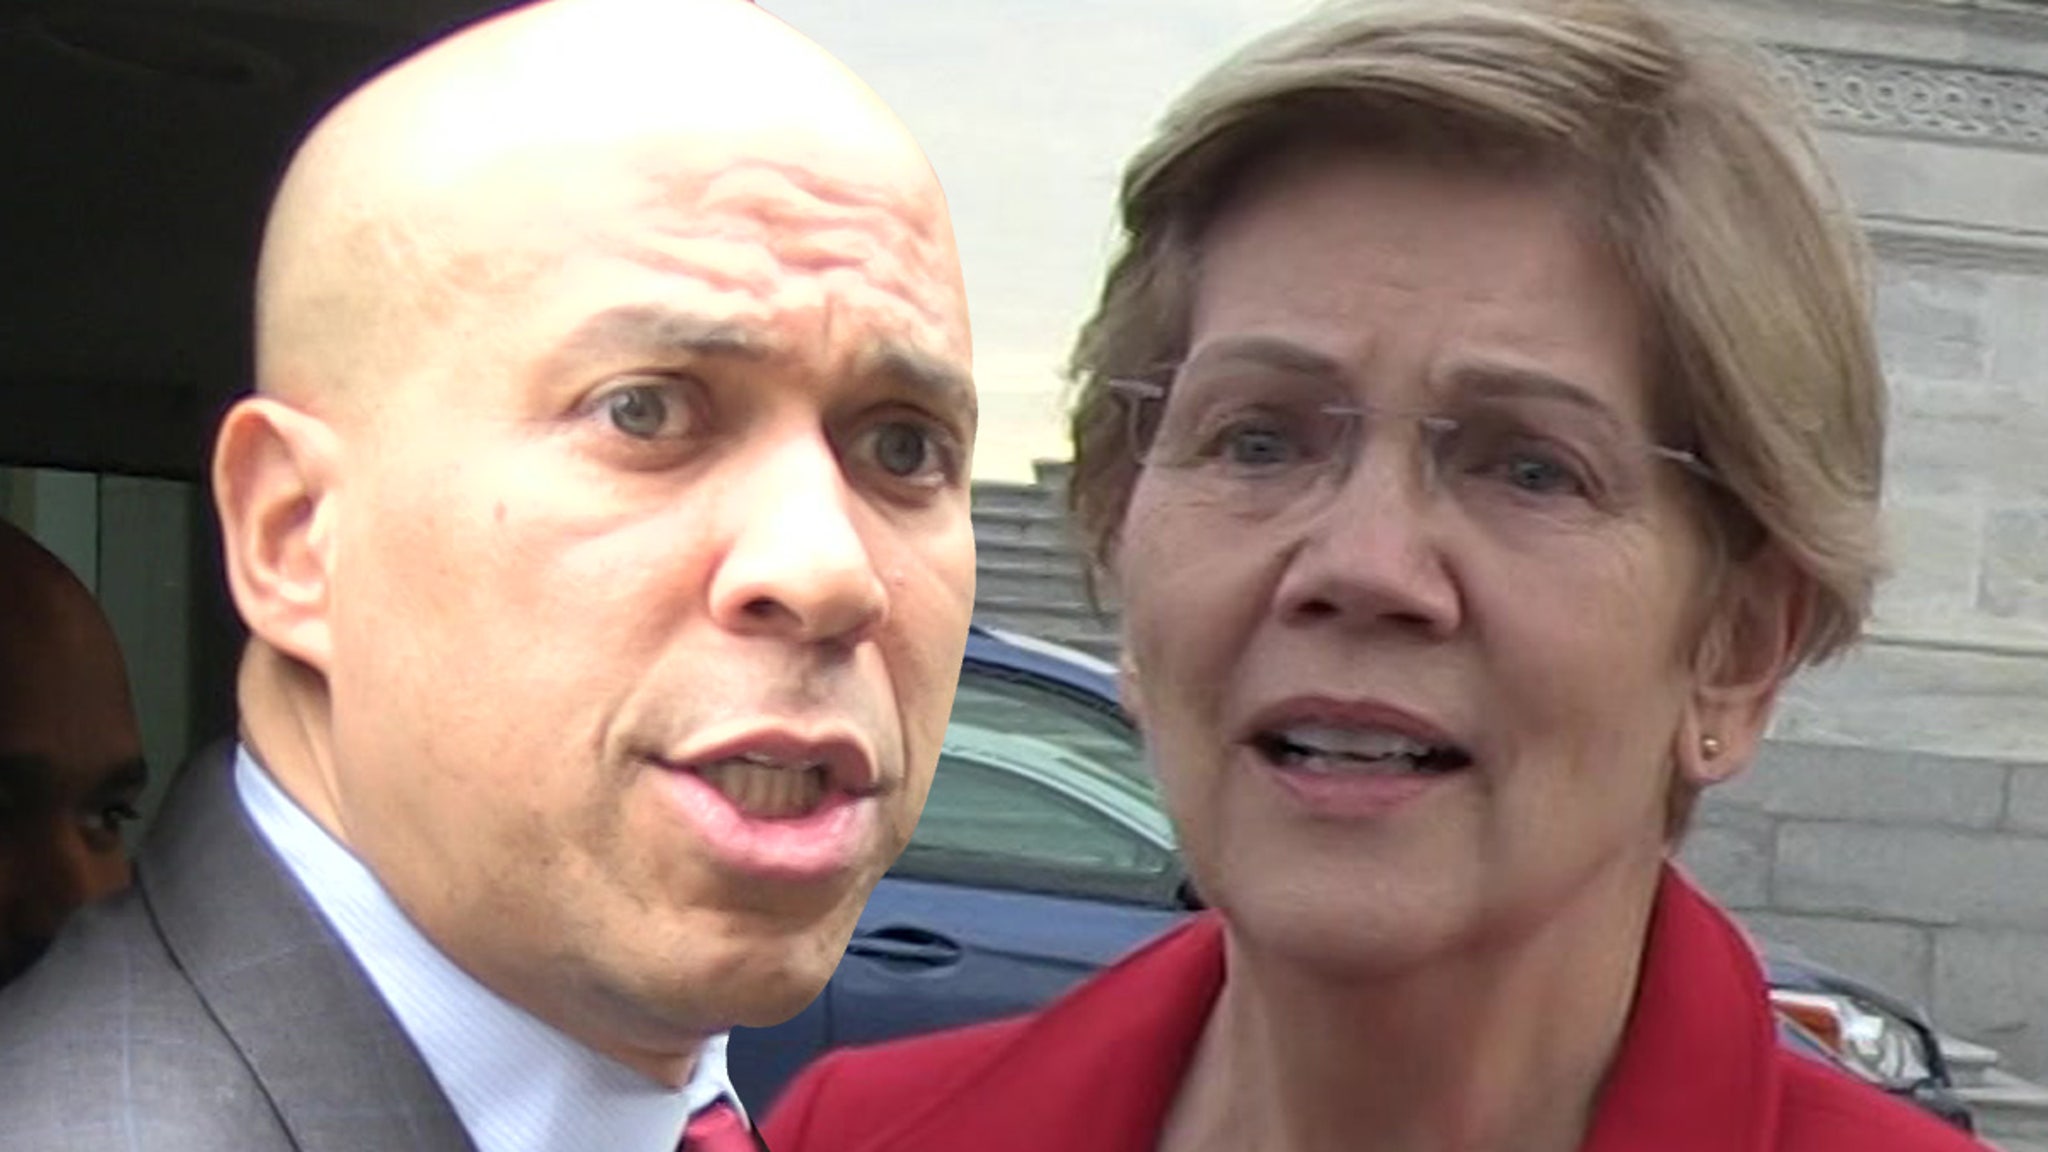 Sen. Cory Booker Tests Positive for COVID After Warren Diagnosis